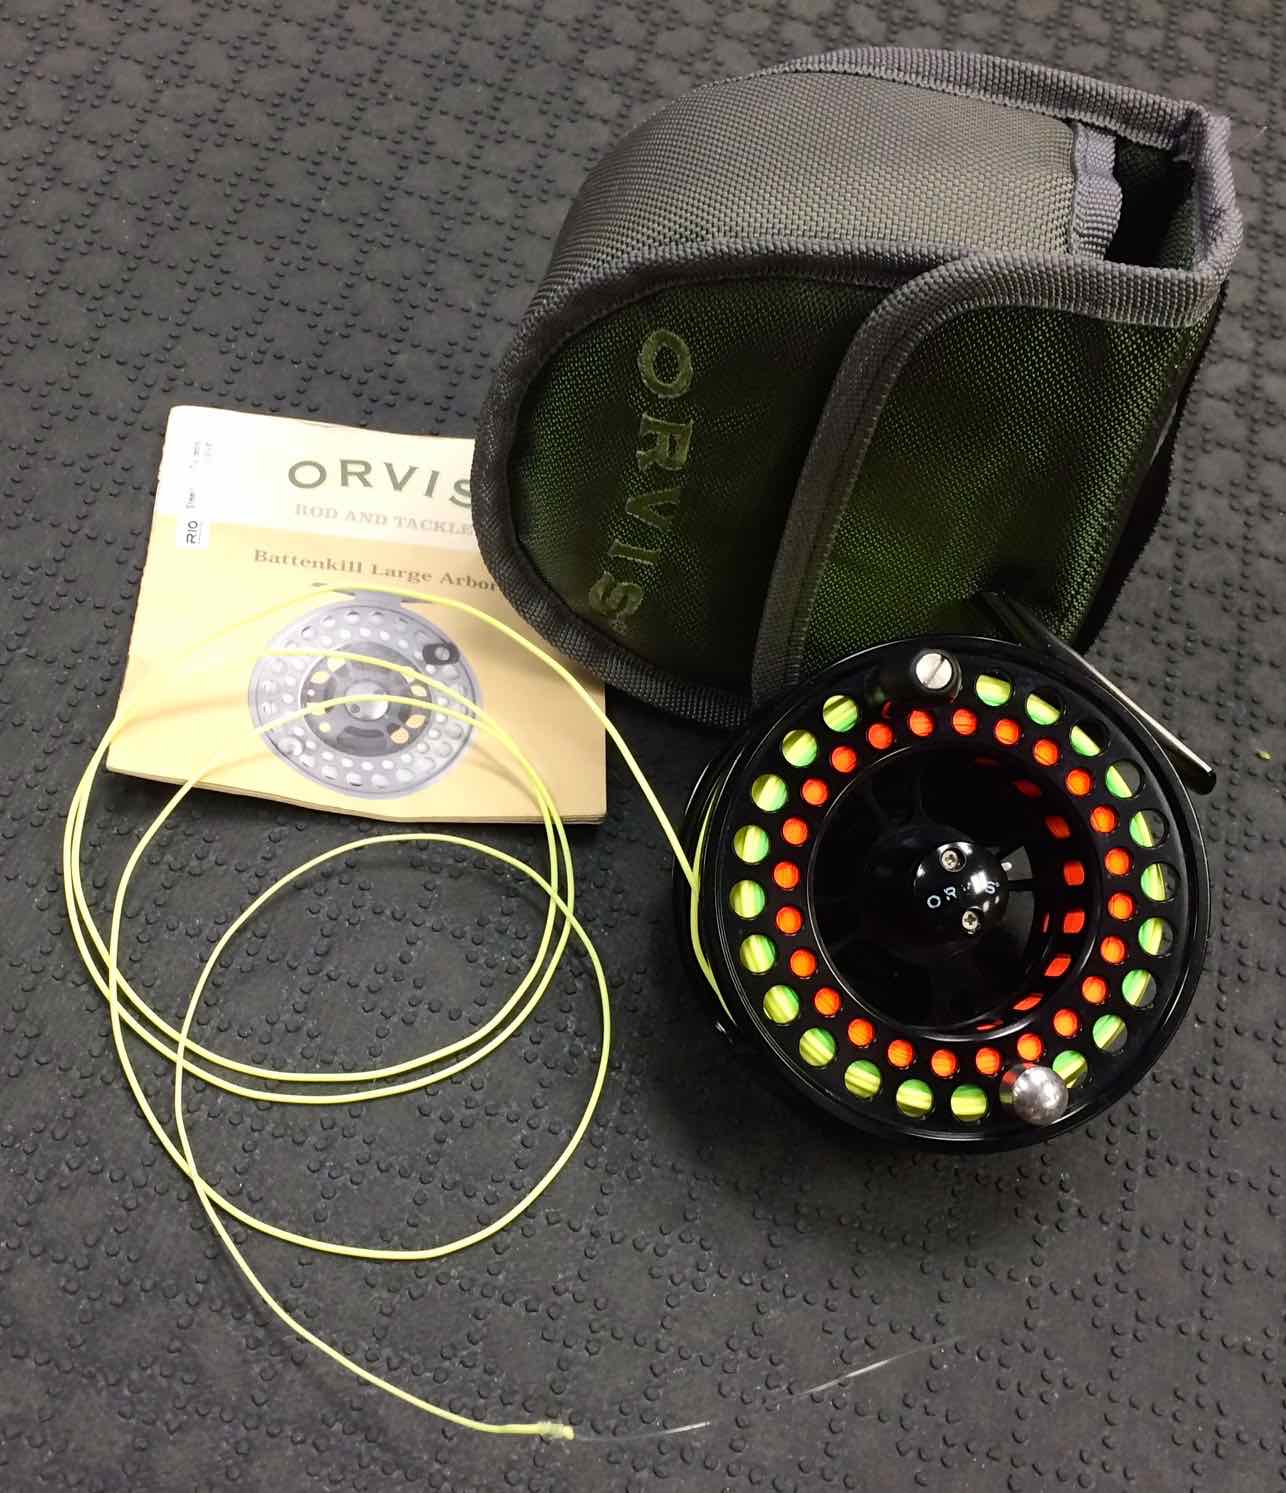 SOLD – Orvis Battenkill Large Arbor IV Fly Reel – C/w a RIO WF8